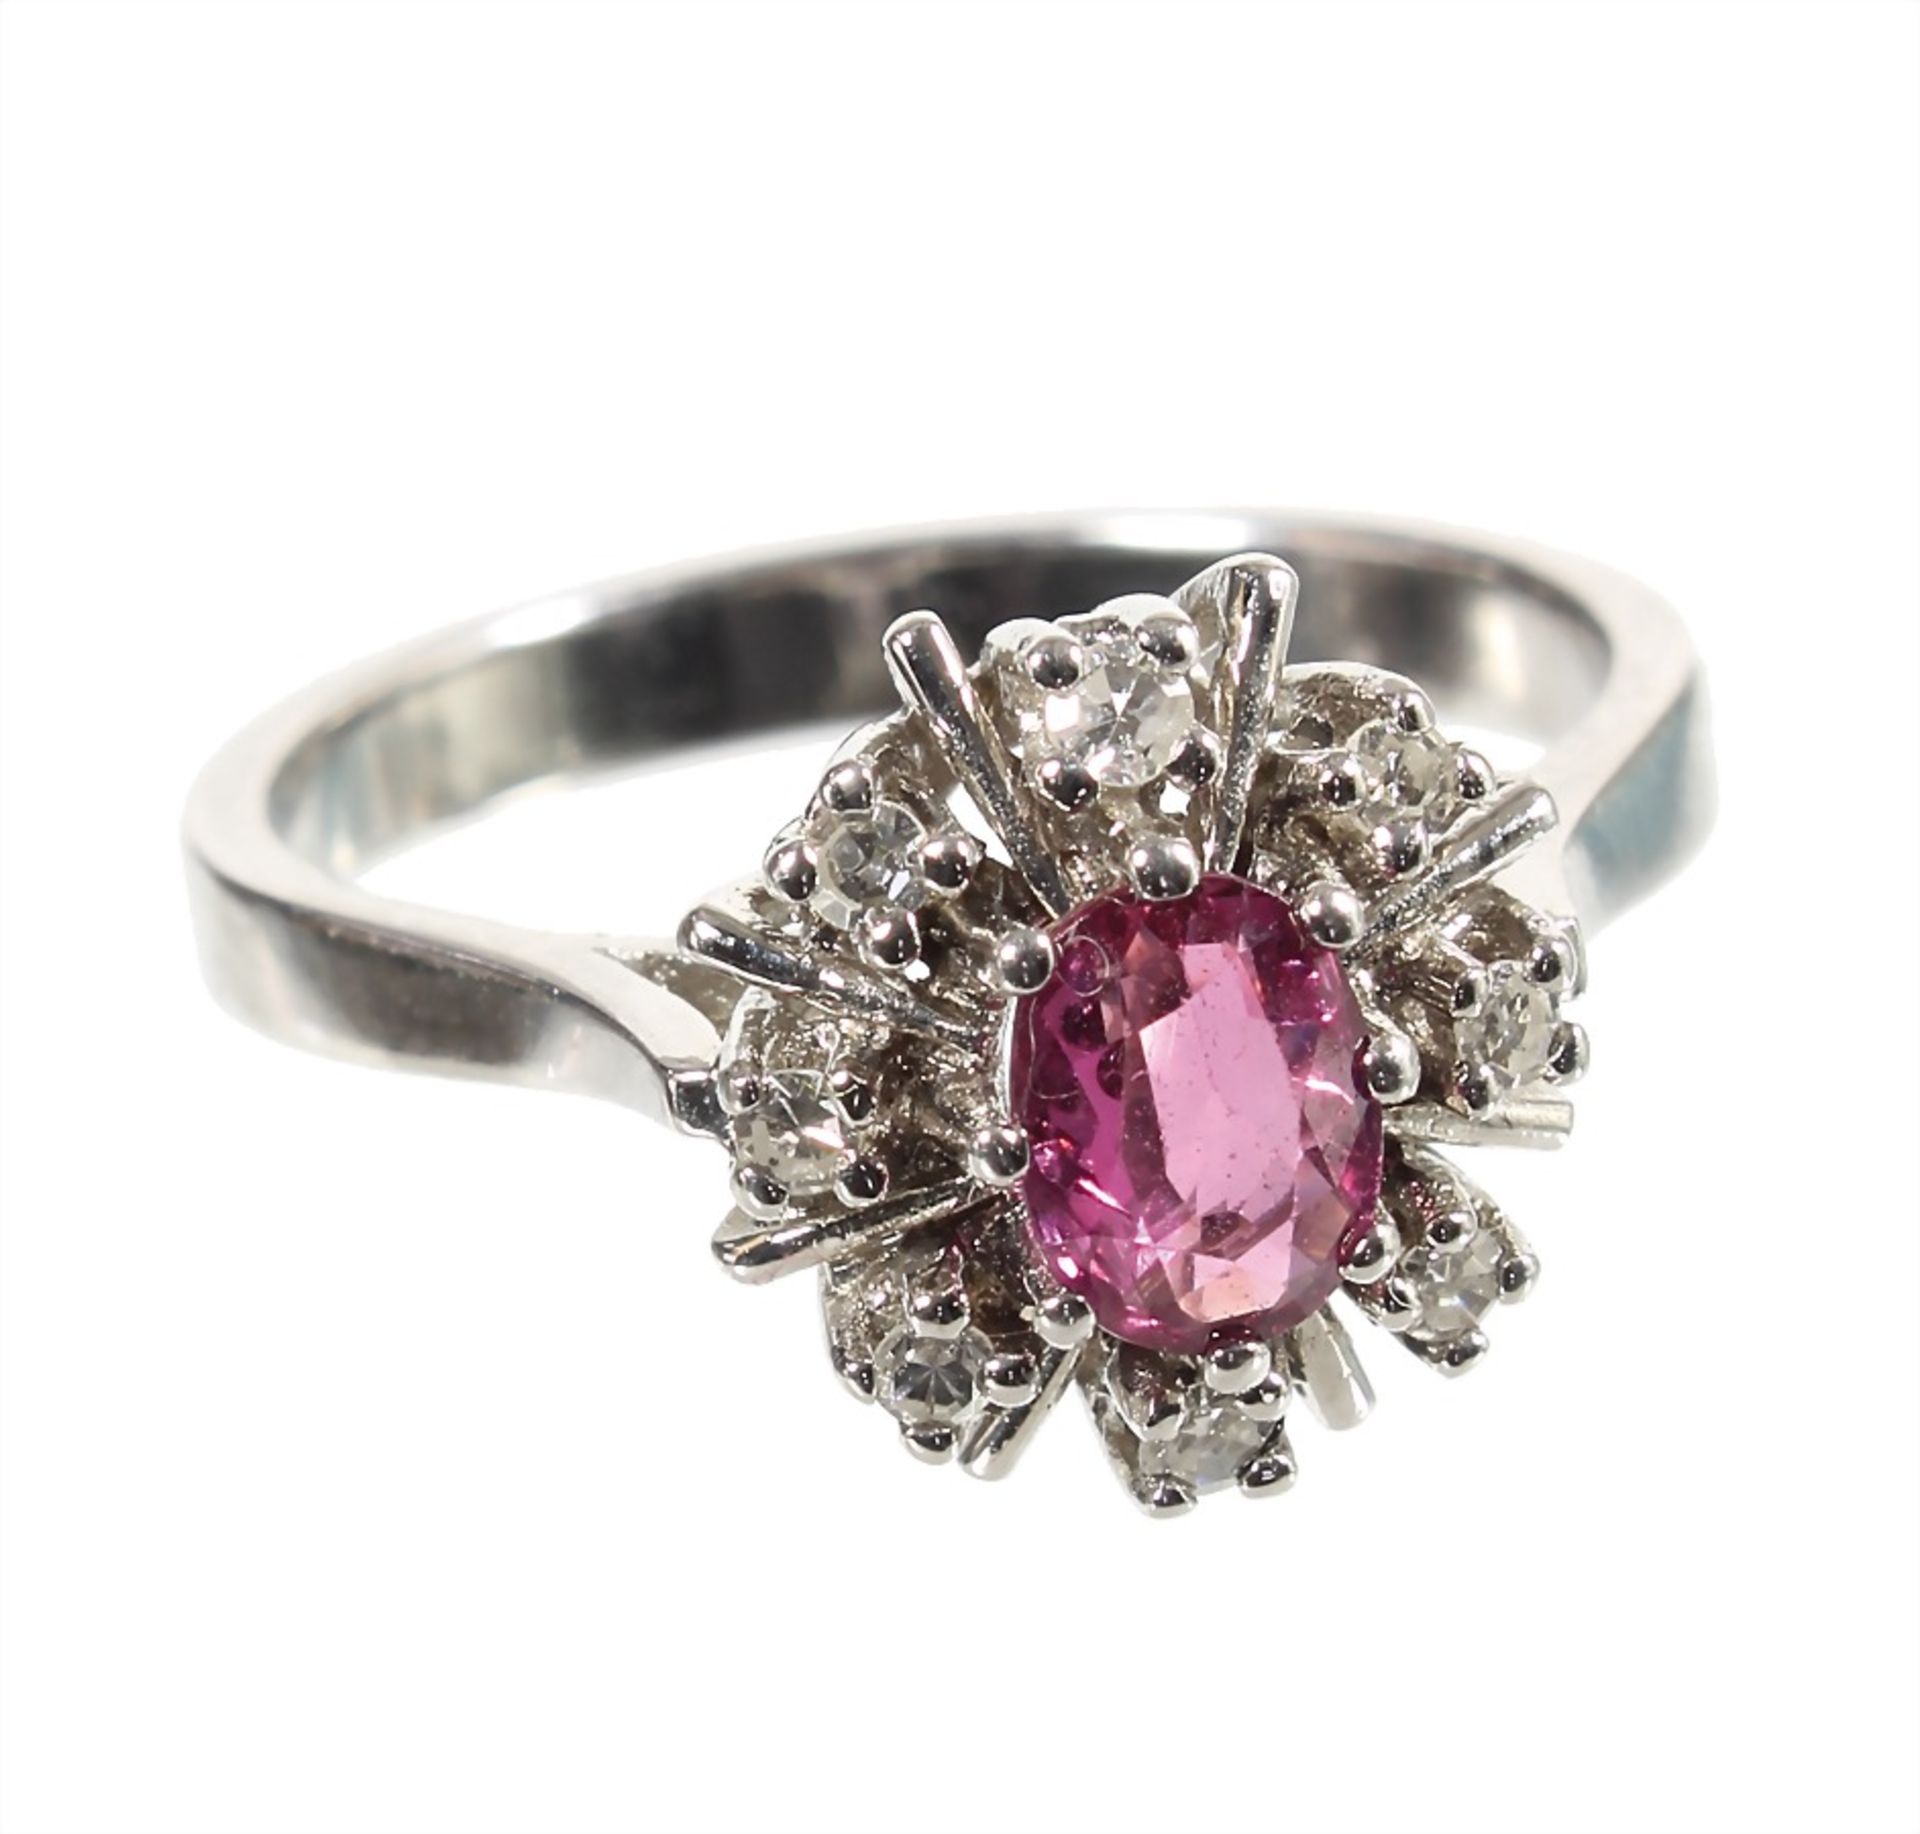 ring, white gold 585/000, 8 pieces 8/8 diamonds c. 0.16 ct white, 1 ruby c. 0.40 ct, ring width c.